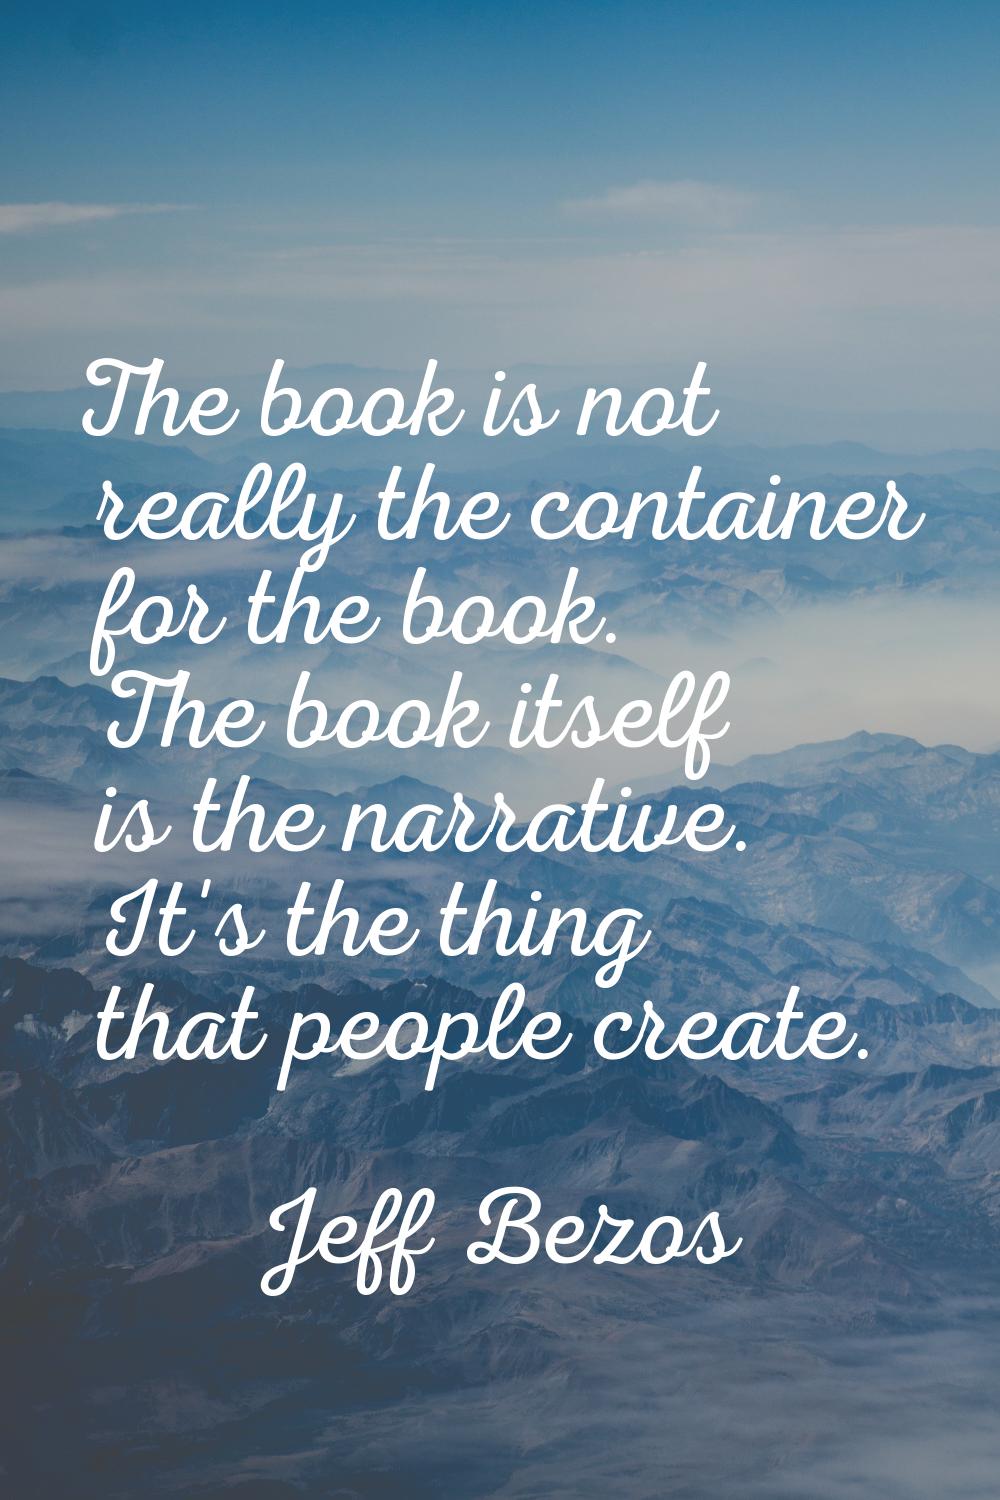 The book is not really the container for the book. The book itself is the narrative. It's the thing